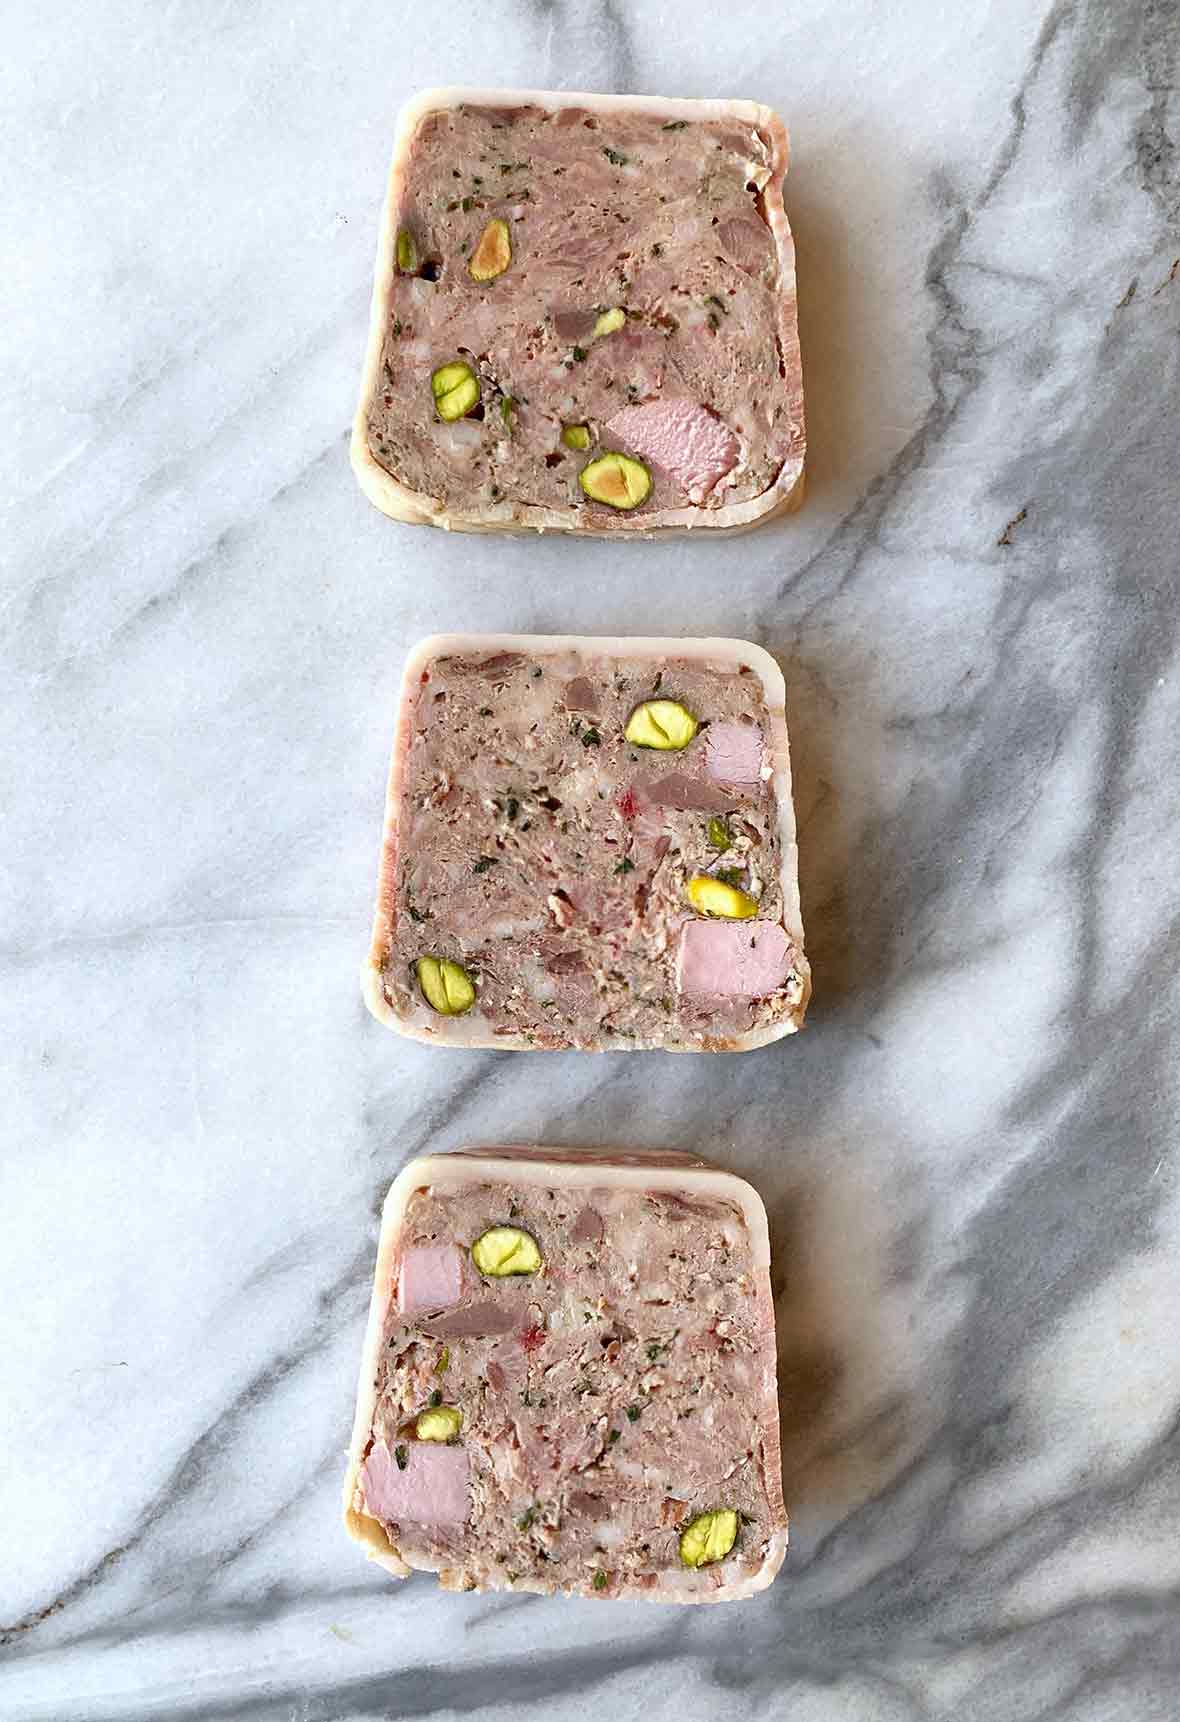 Three slices of pate de campagne on a marble surface